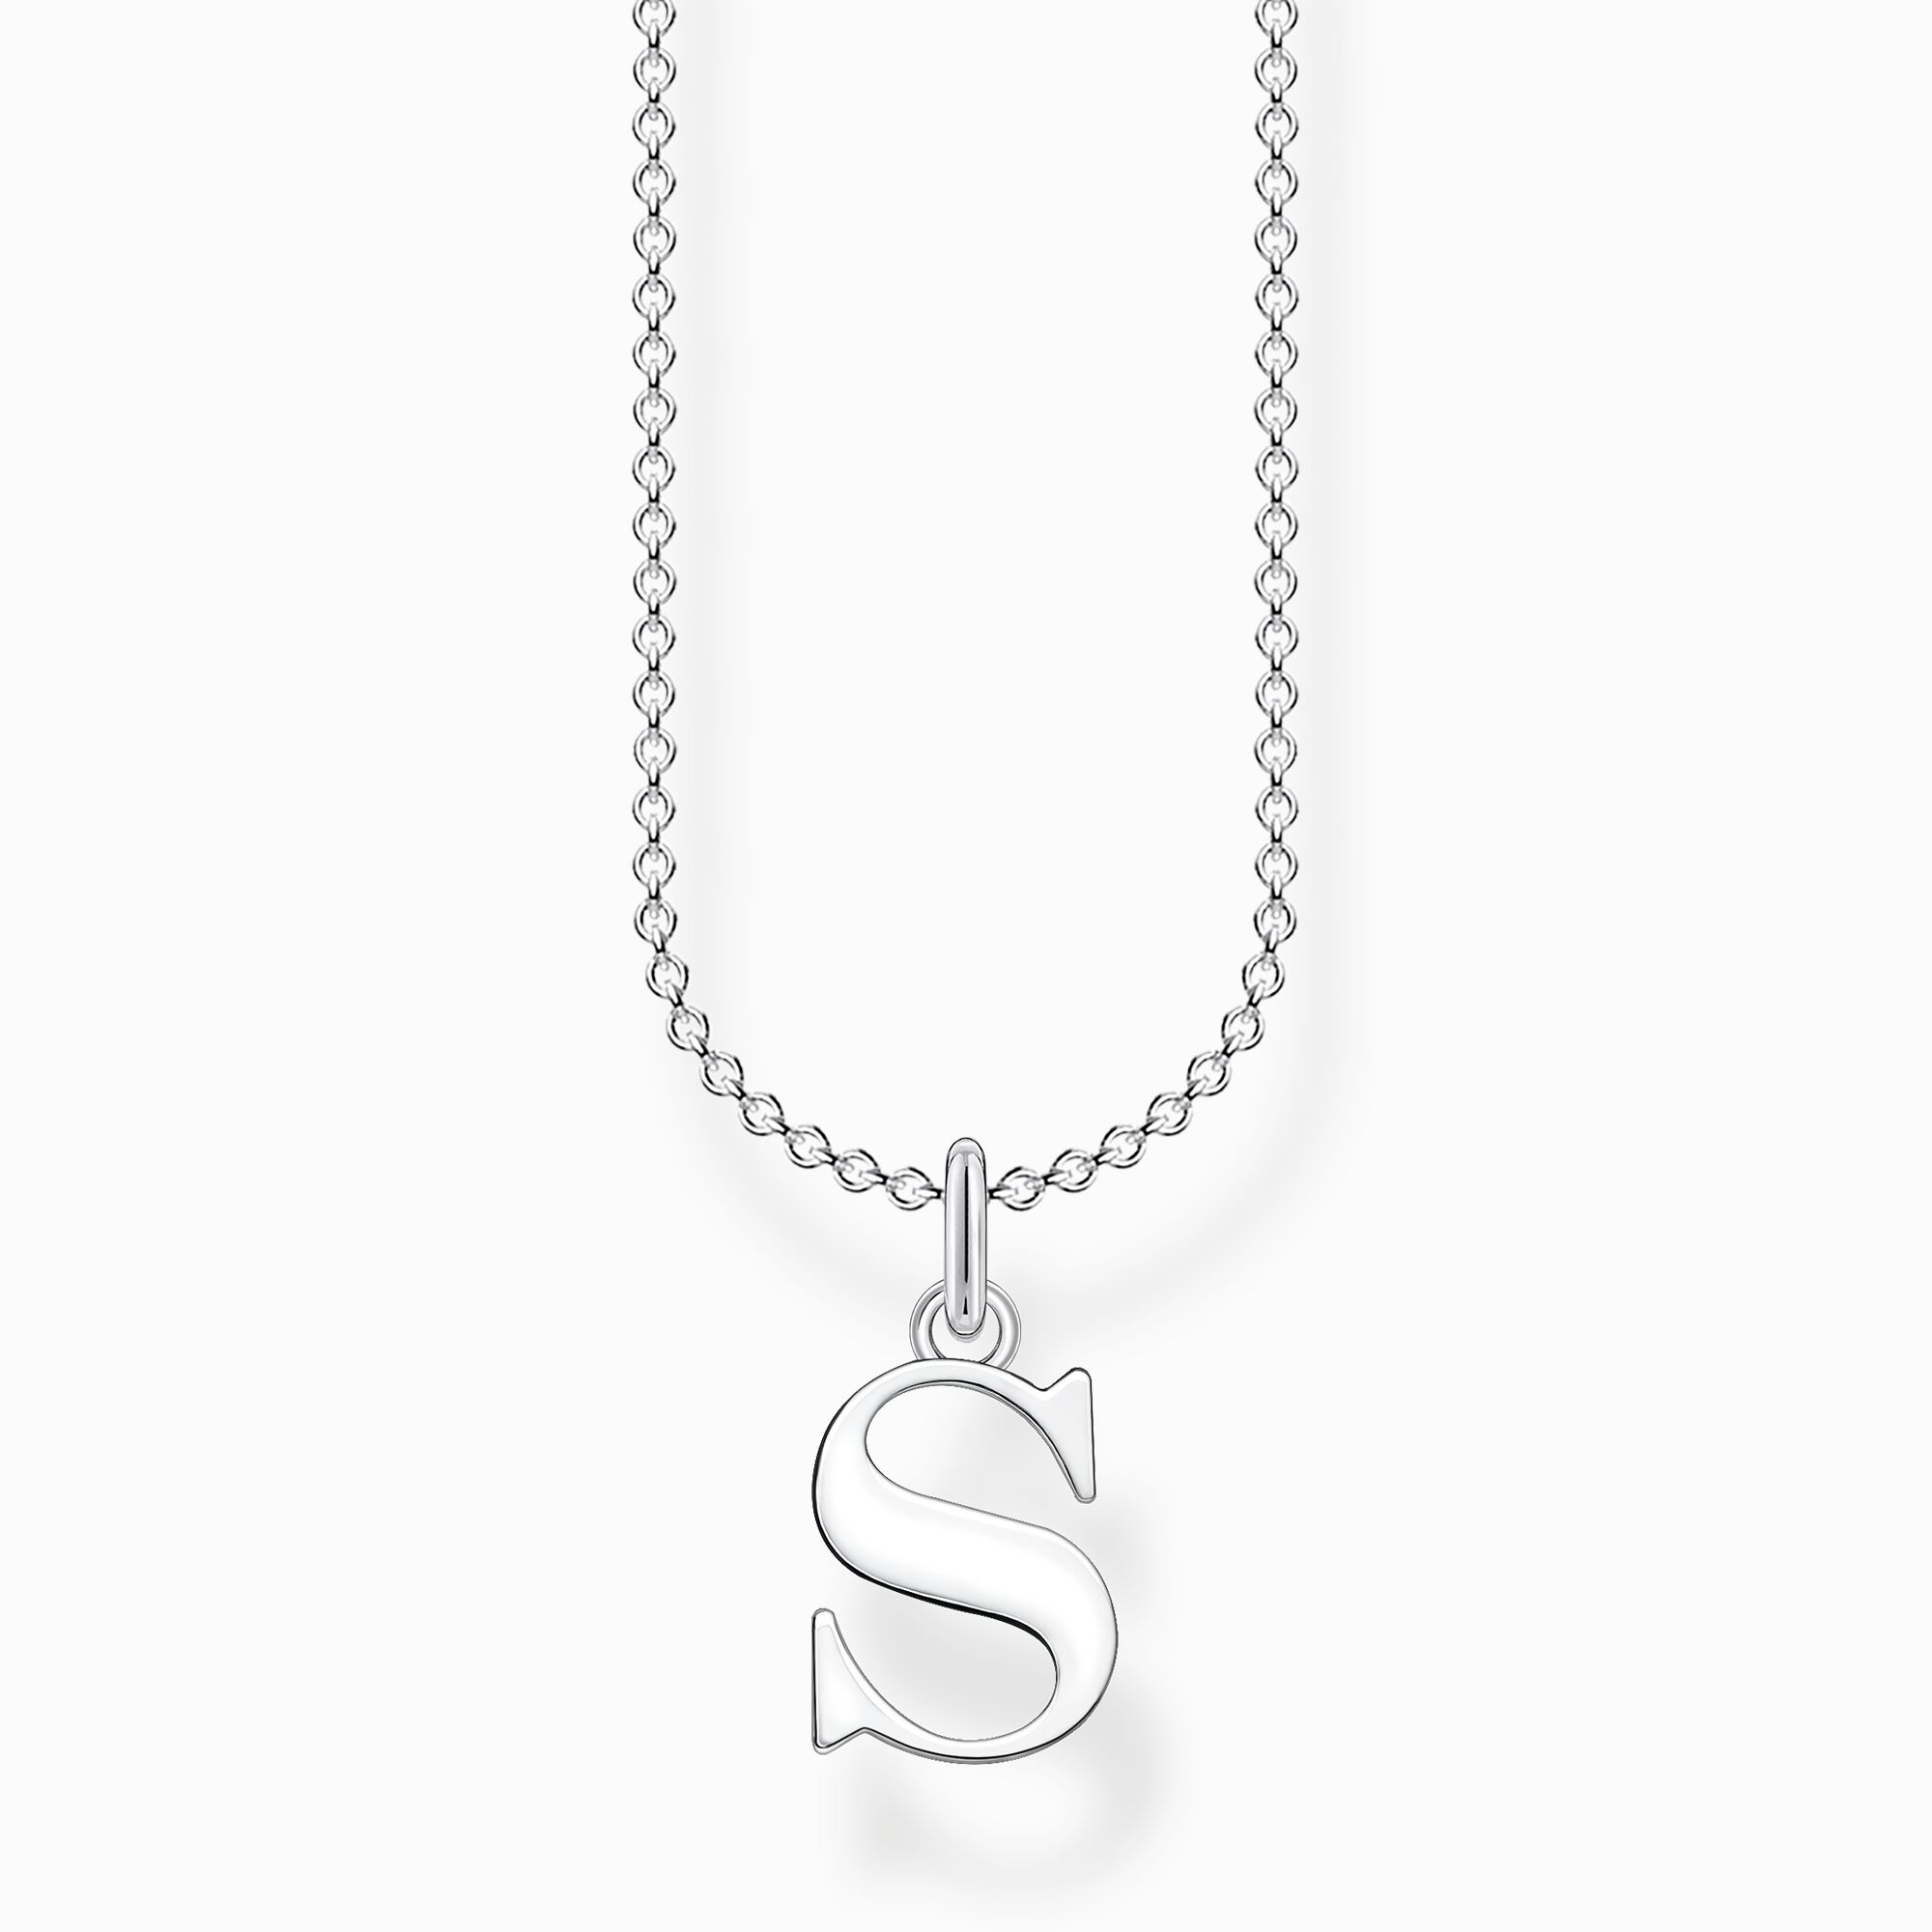 PERSONALIZED GOLD INITIAL KEY PENDANT NECKLACE SilverStella - 925